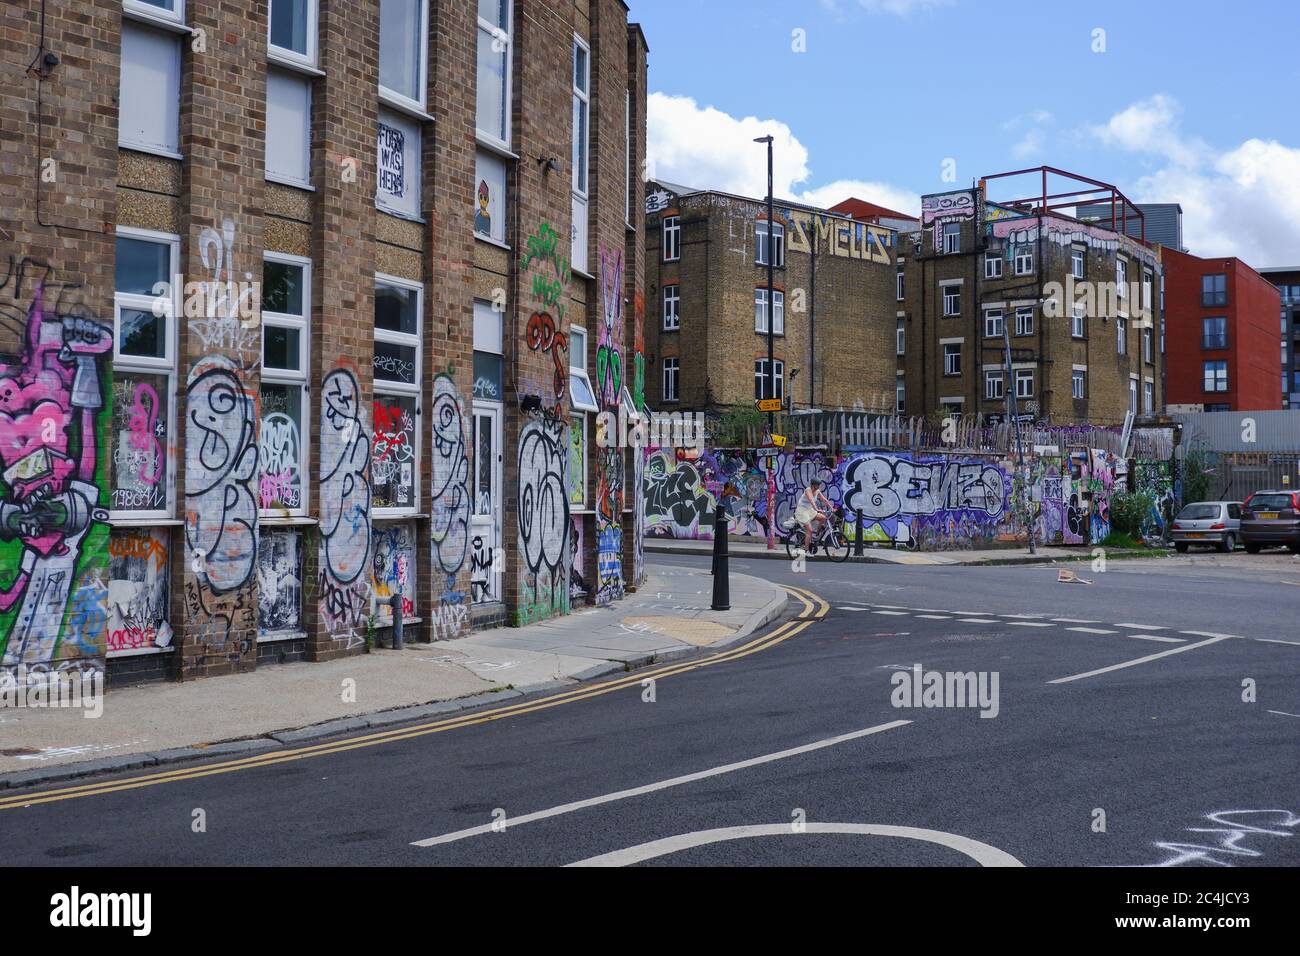 Graffiti on a derelict building in Hackney Wick in East London,during covid-19 lockdown Stock Photo